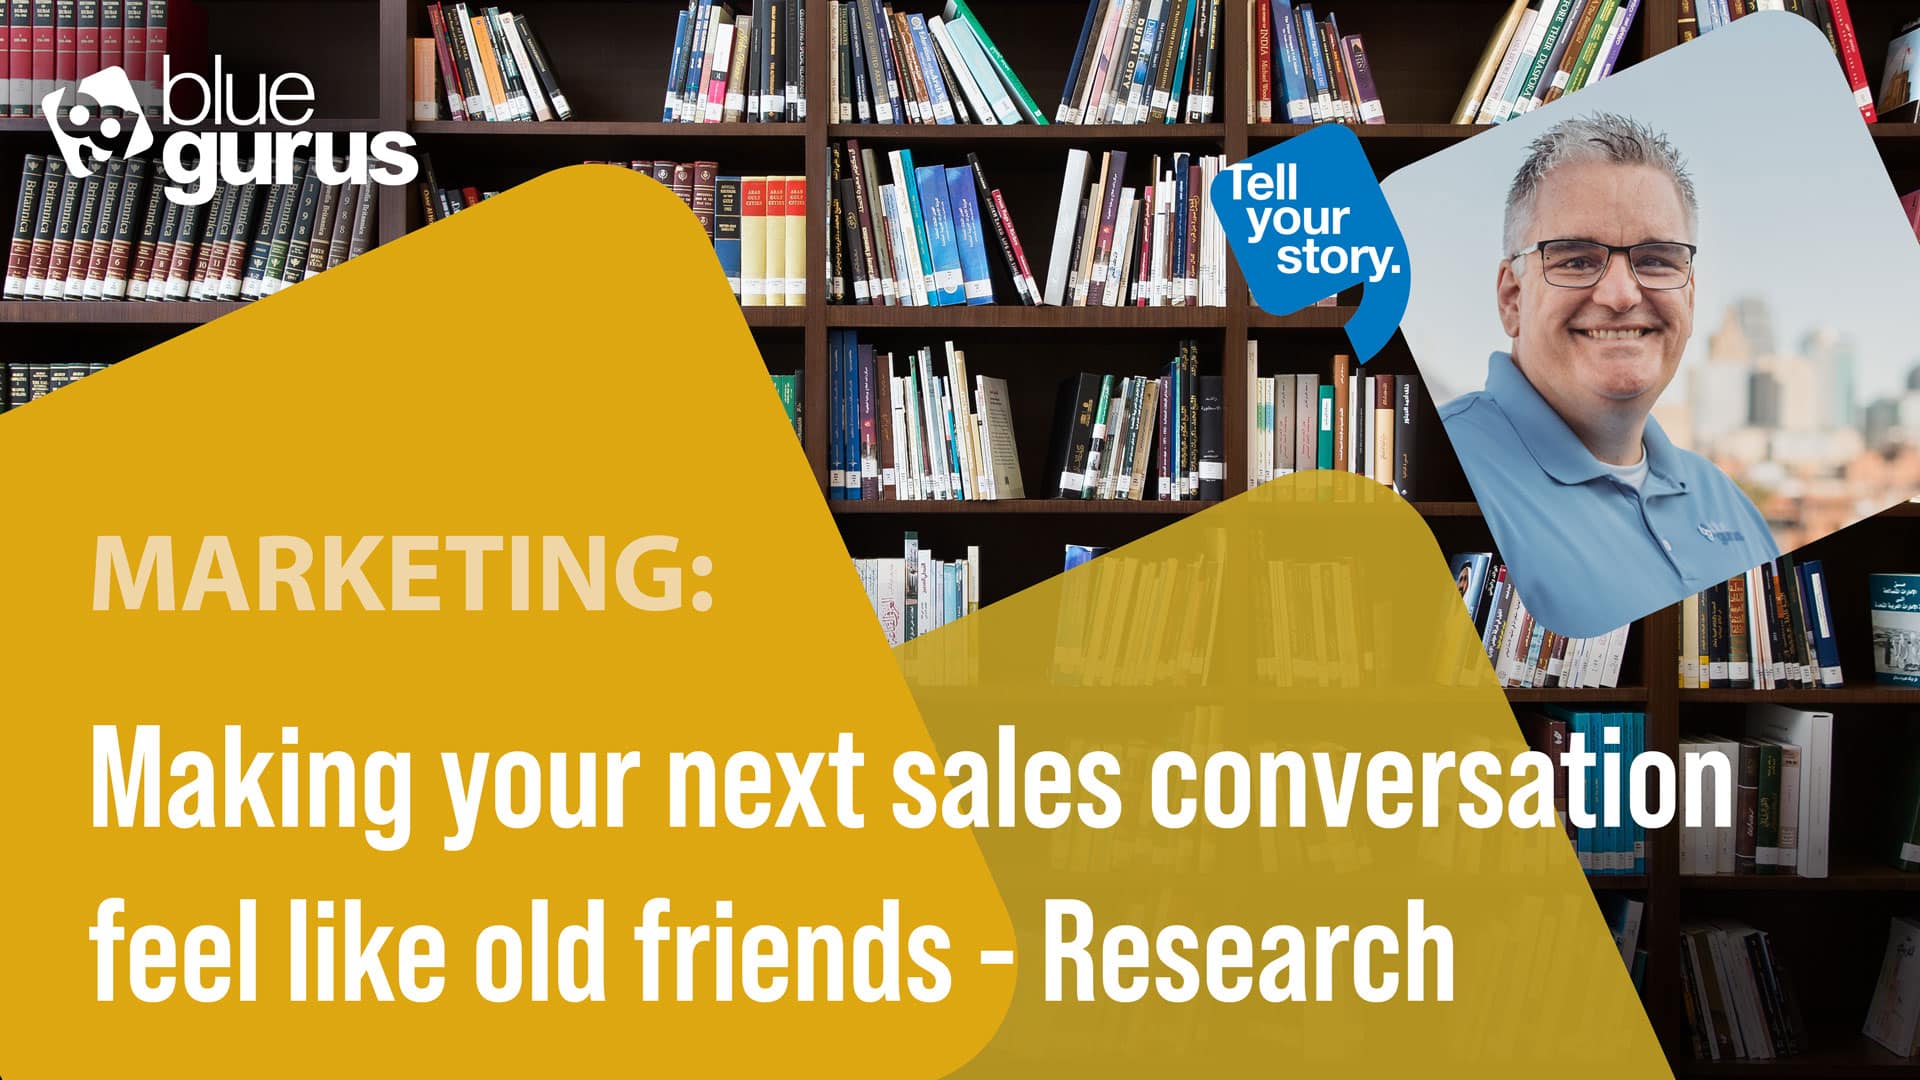 Making your next sales conversation feel like old friends - Research